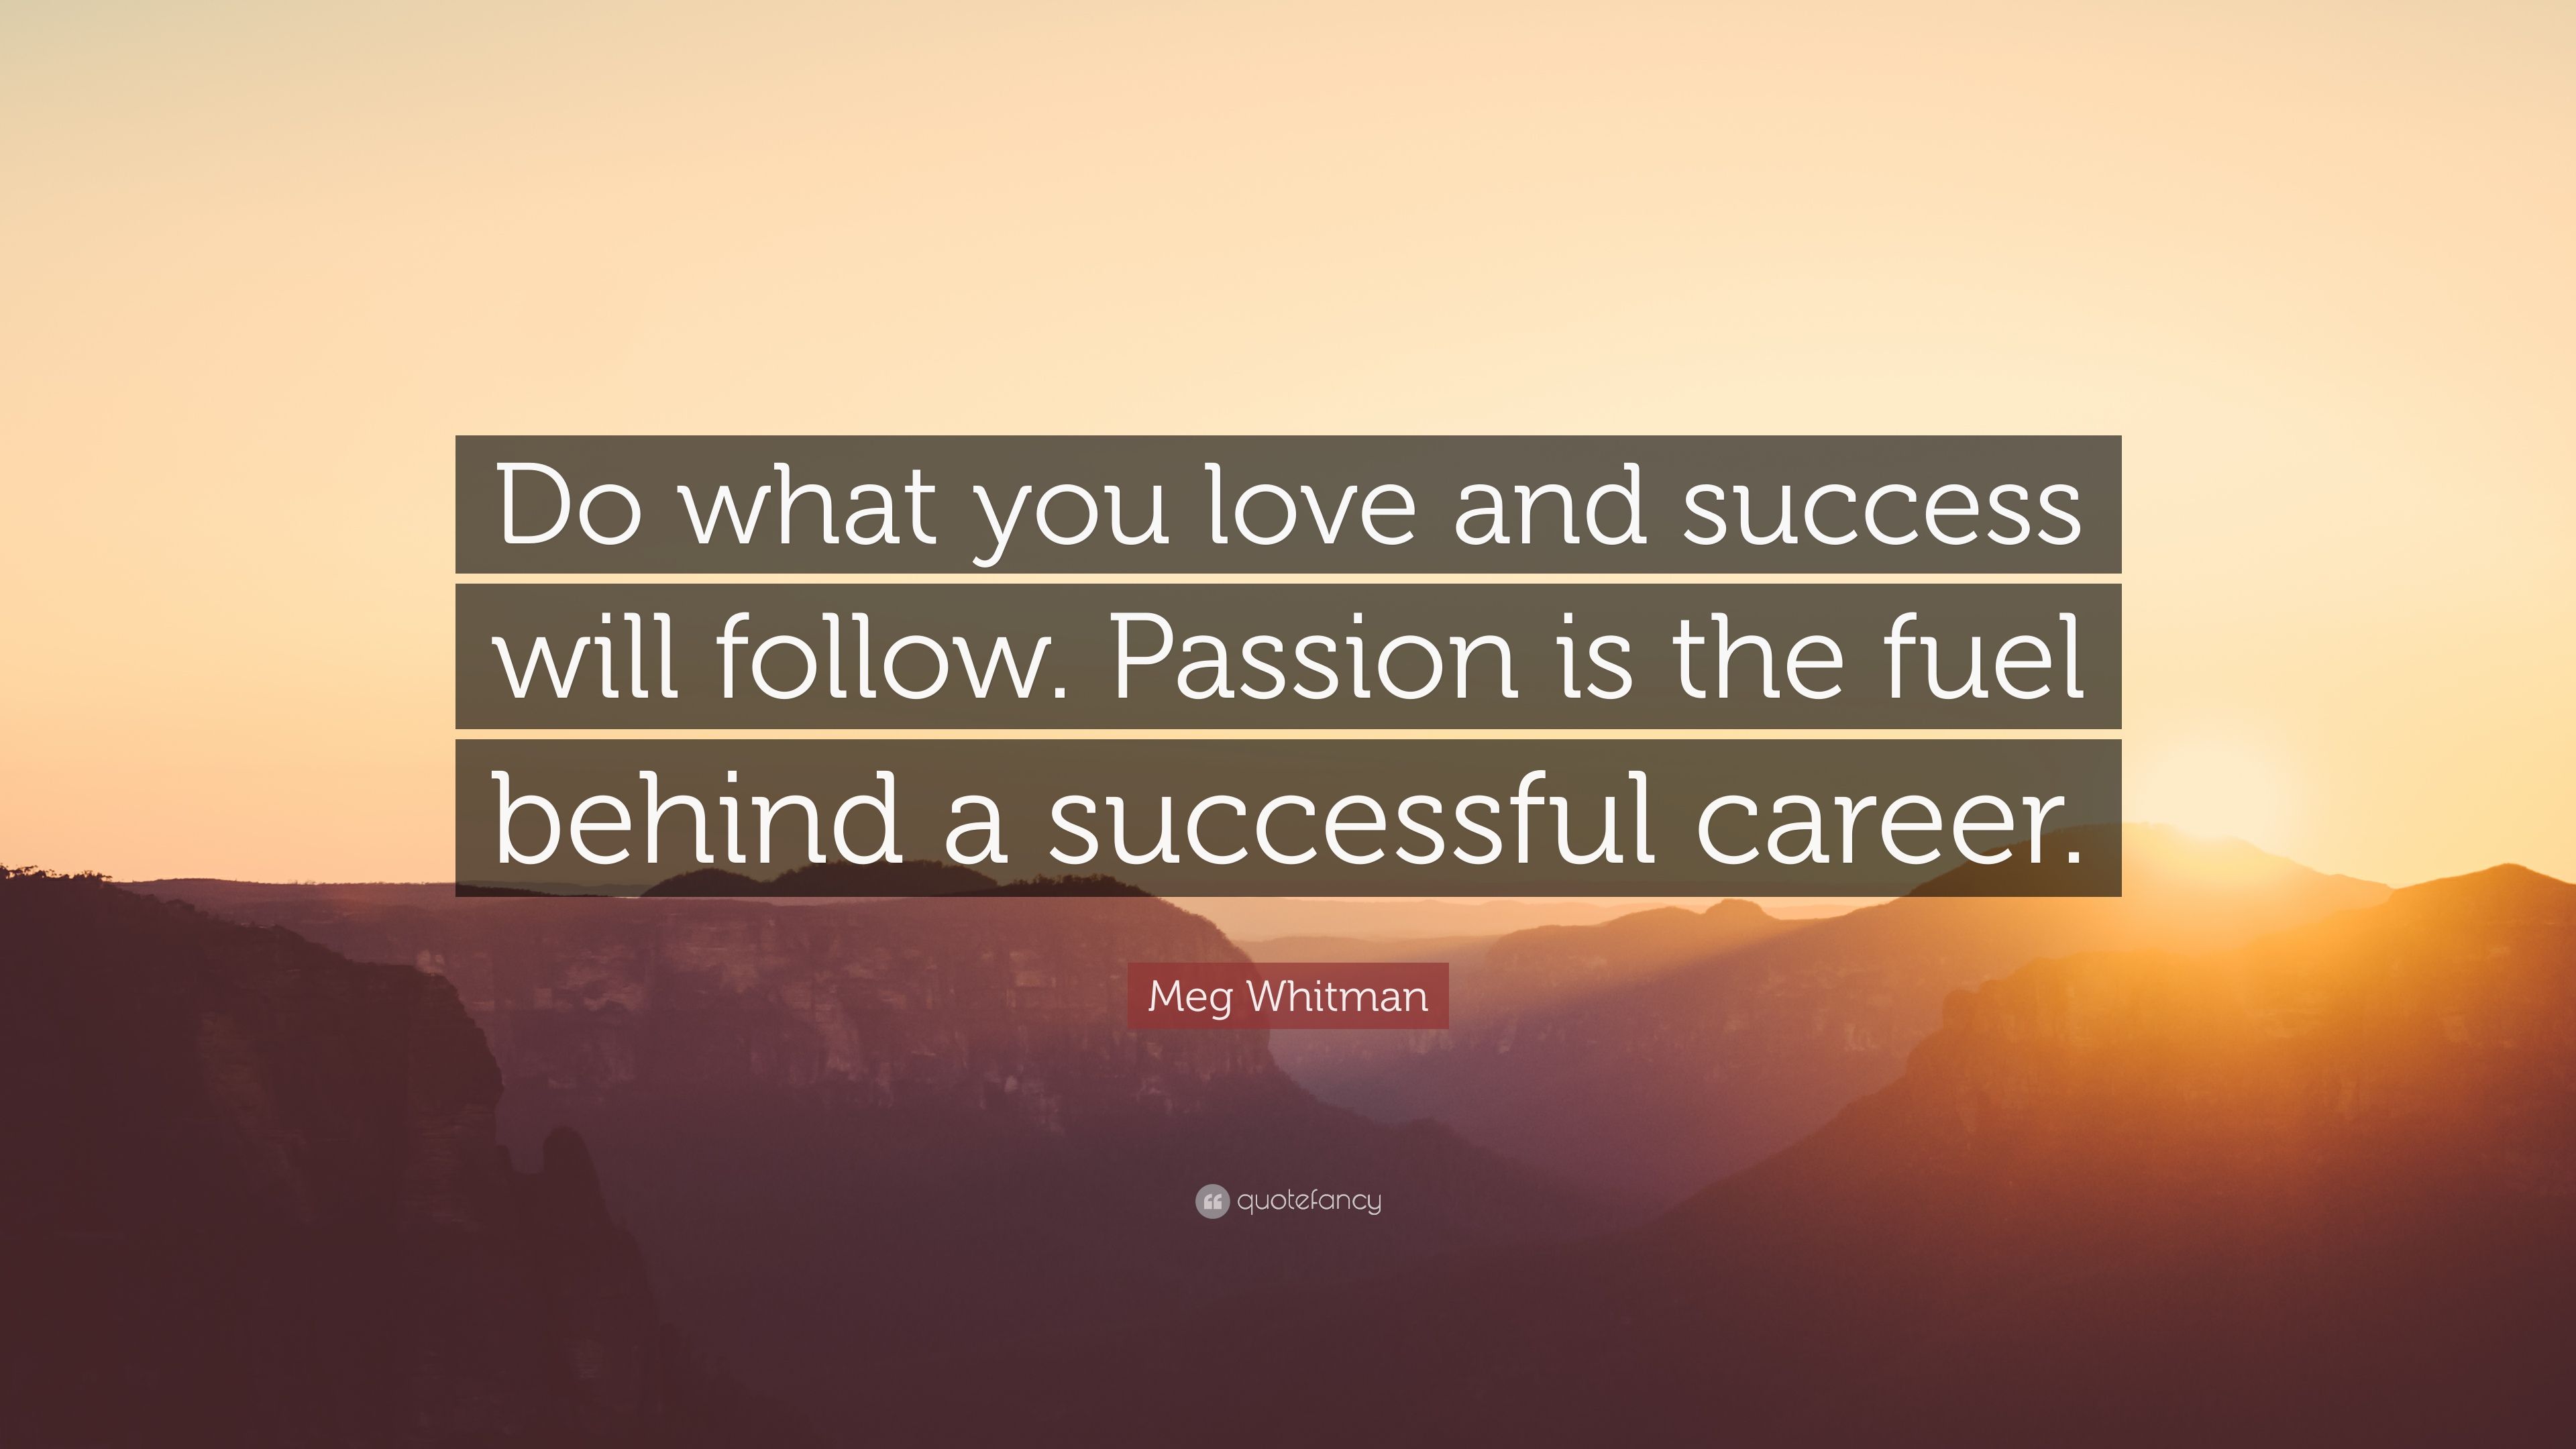 Meg Whitman Quote: “Do what you love and success will follow